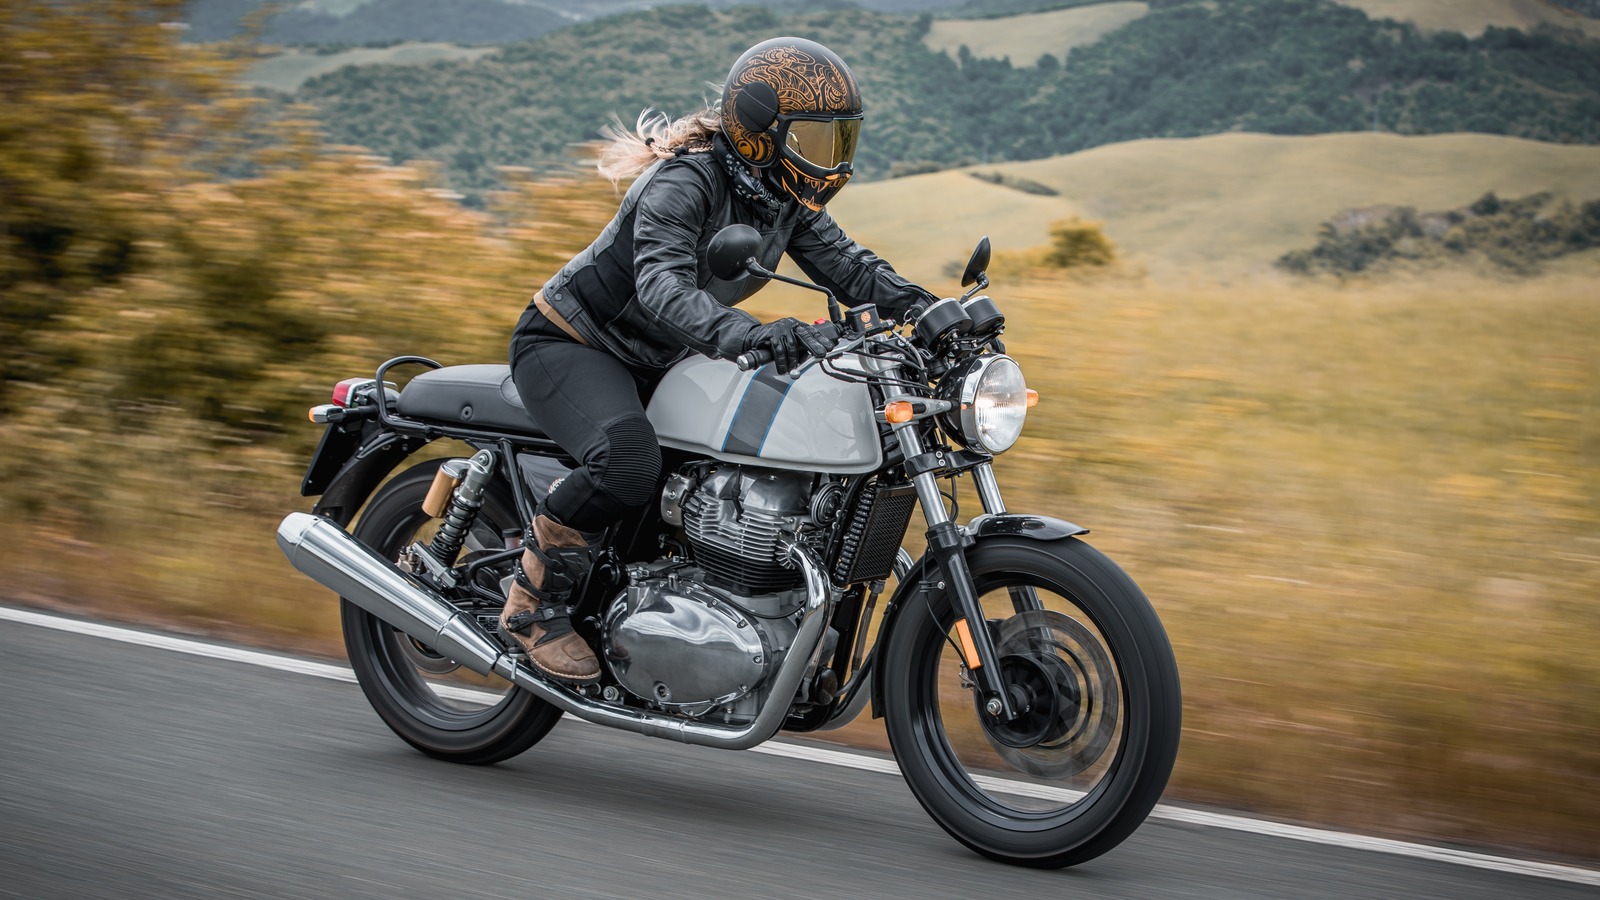 5 Of The Most Underrated Motorcycle Accessories Worth Trying For Yourself